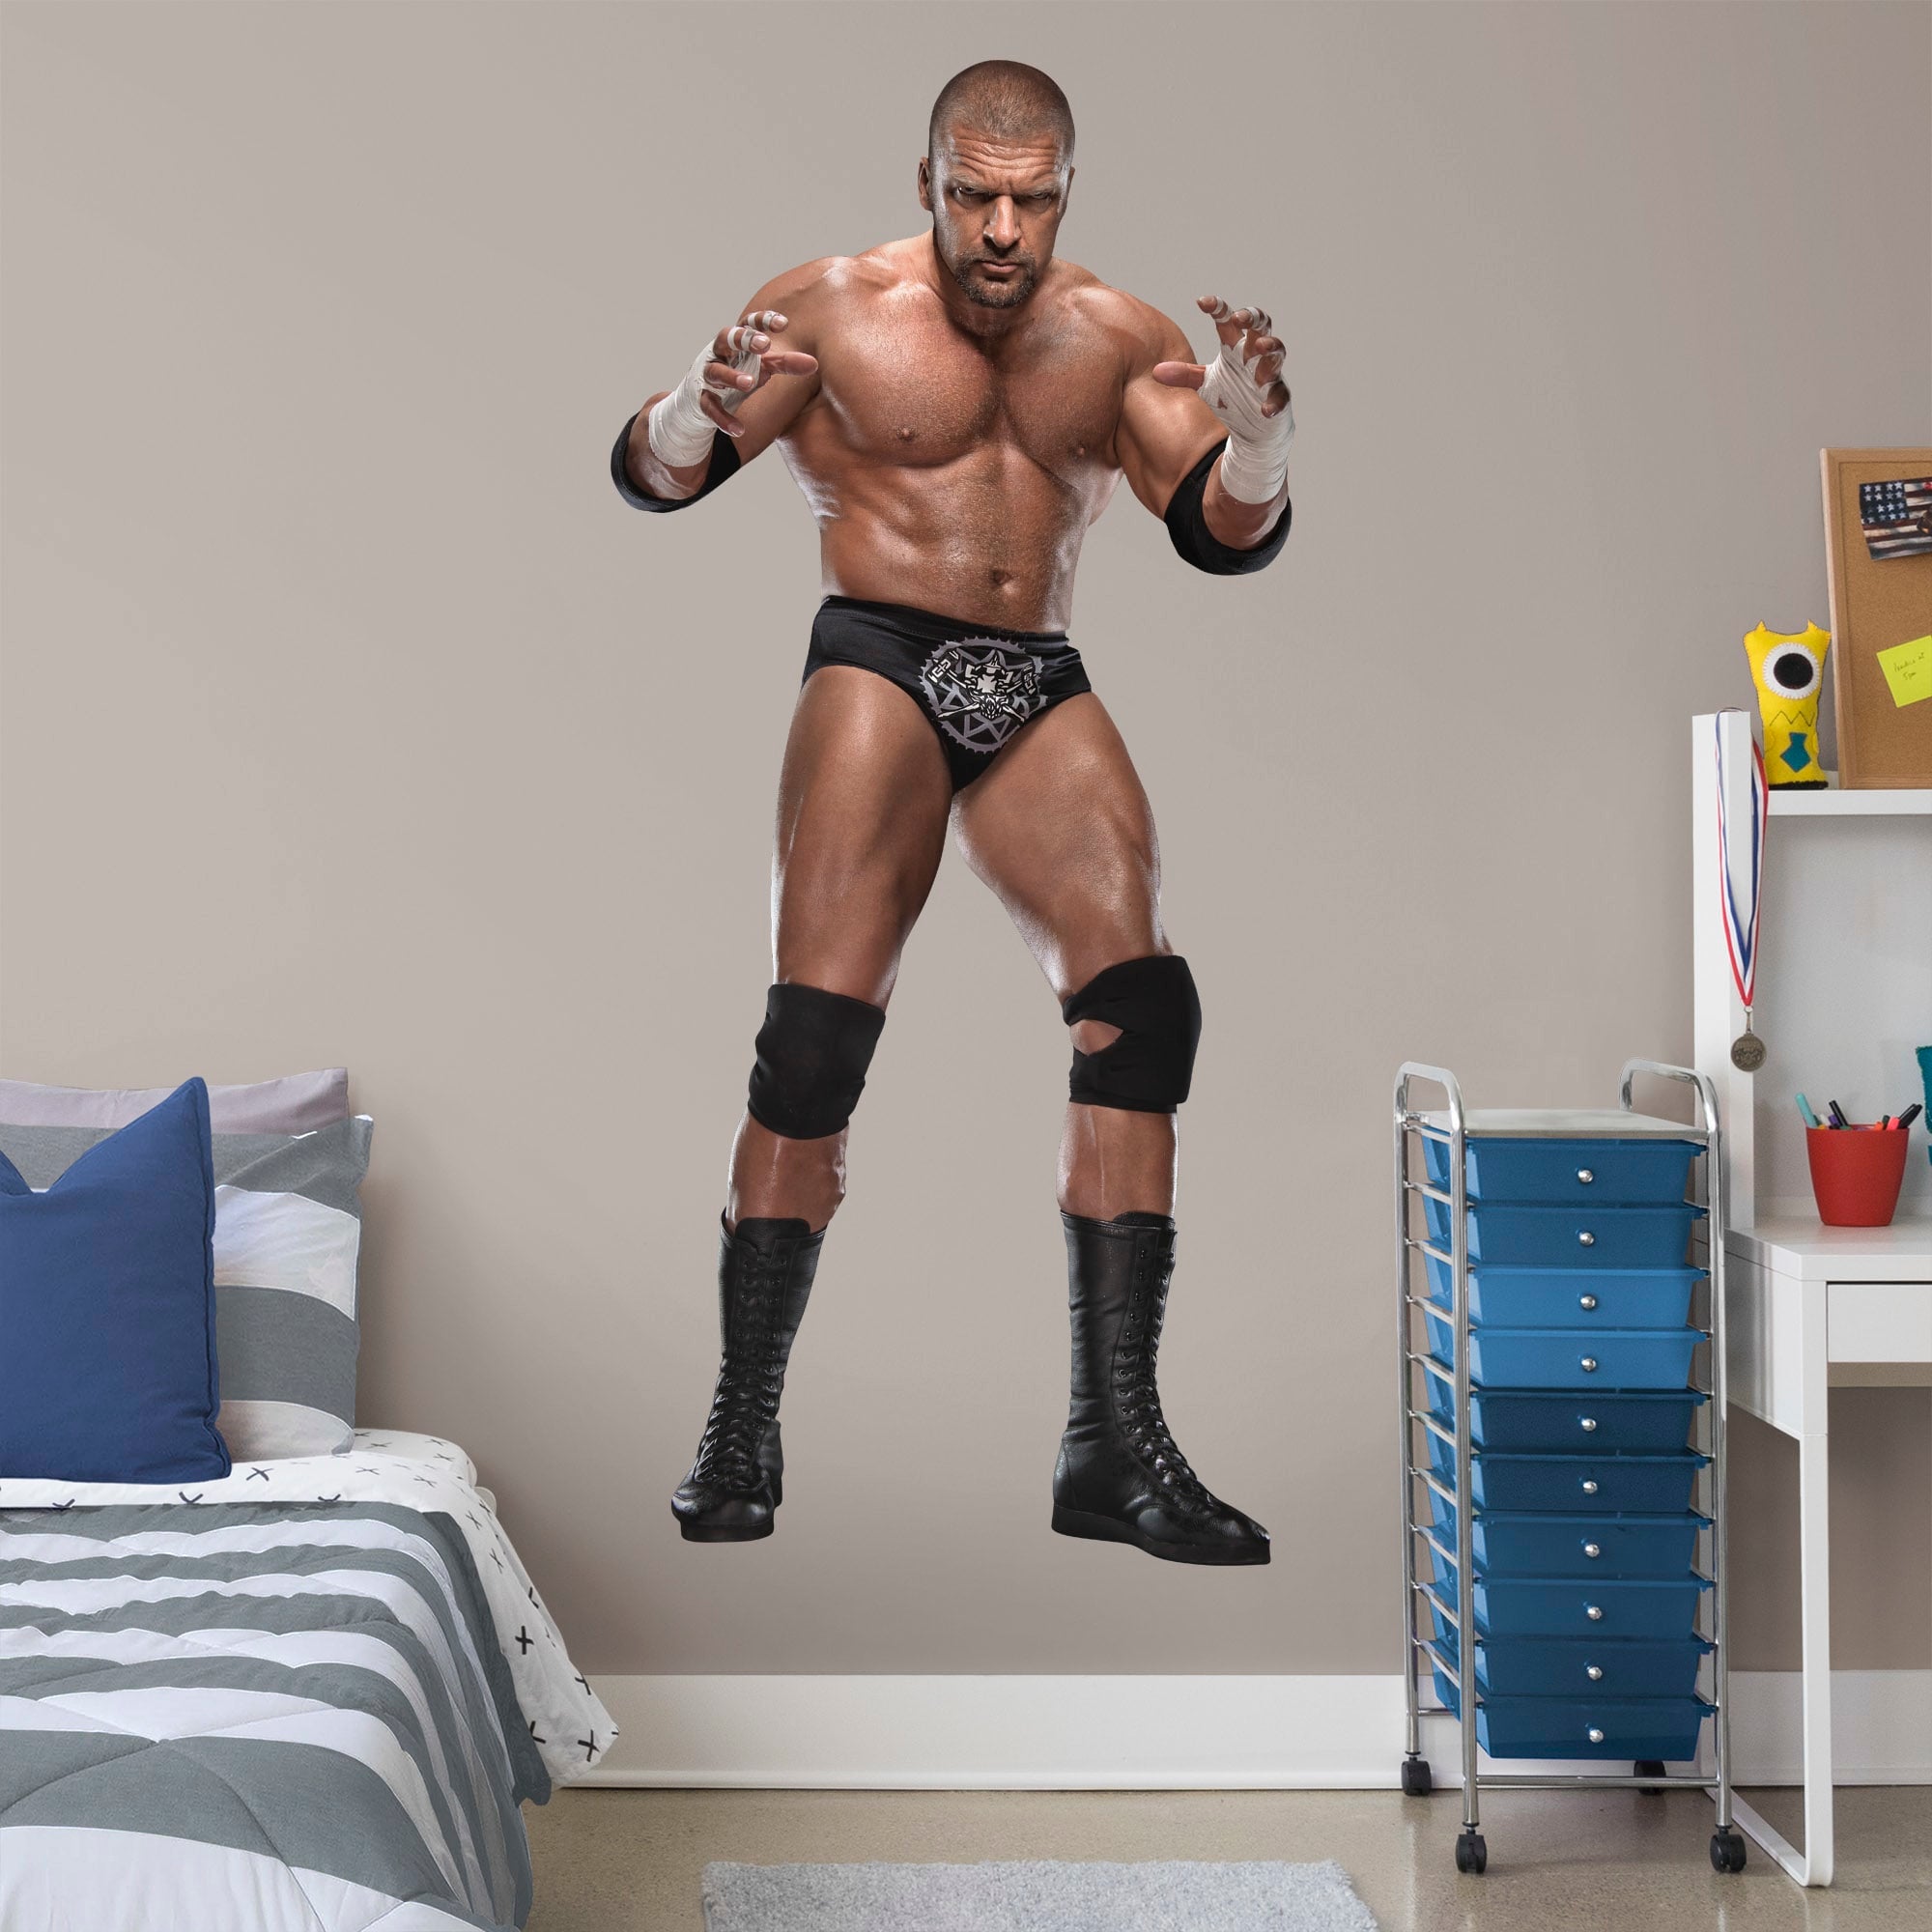 Triple H for WWE - Officially Licensed Removable Wall Decal Life-Size Superstar + 2 Decals (35"W x 78"H) by Fathead | Vinyl